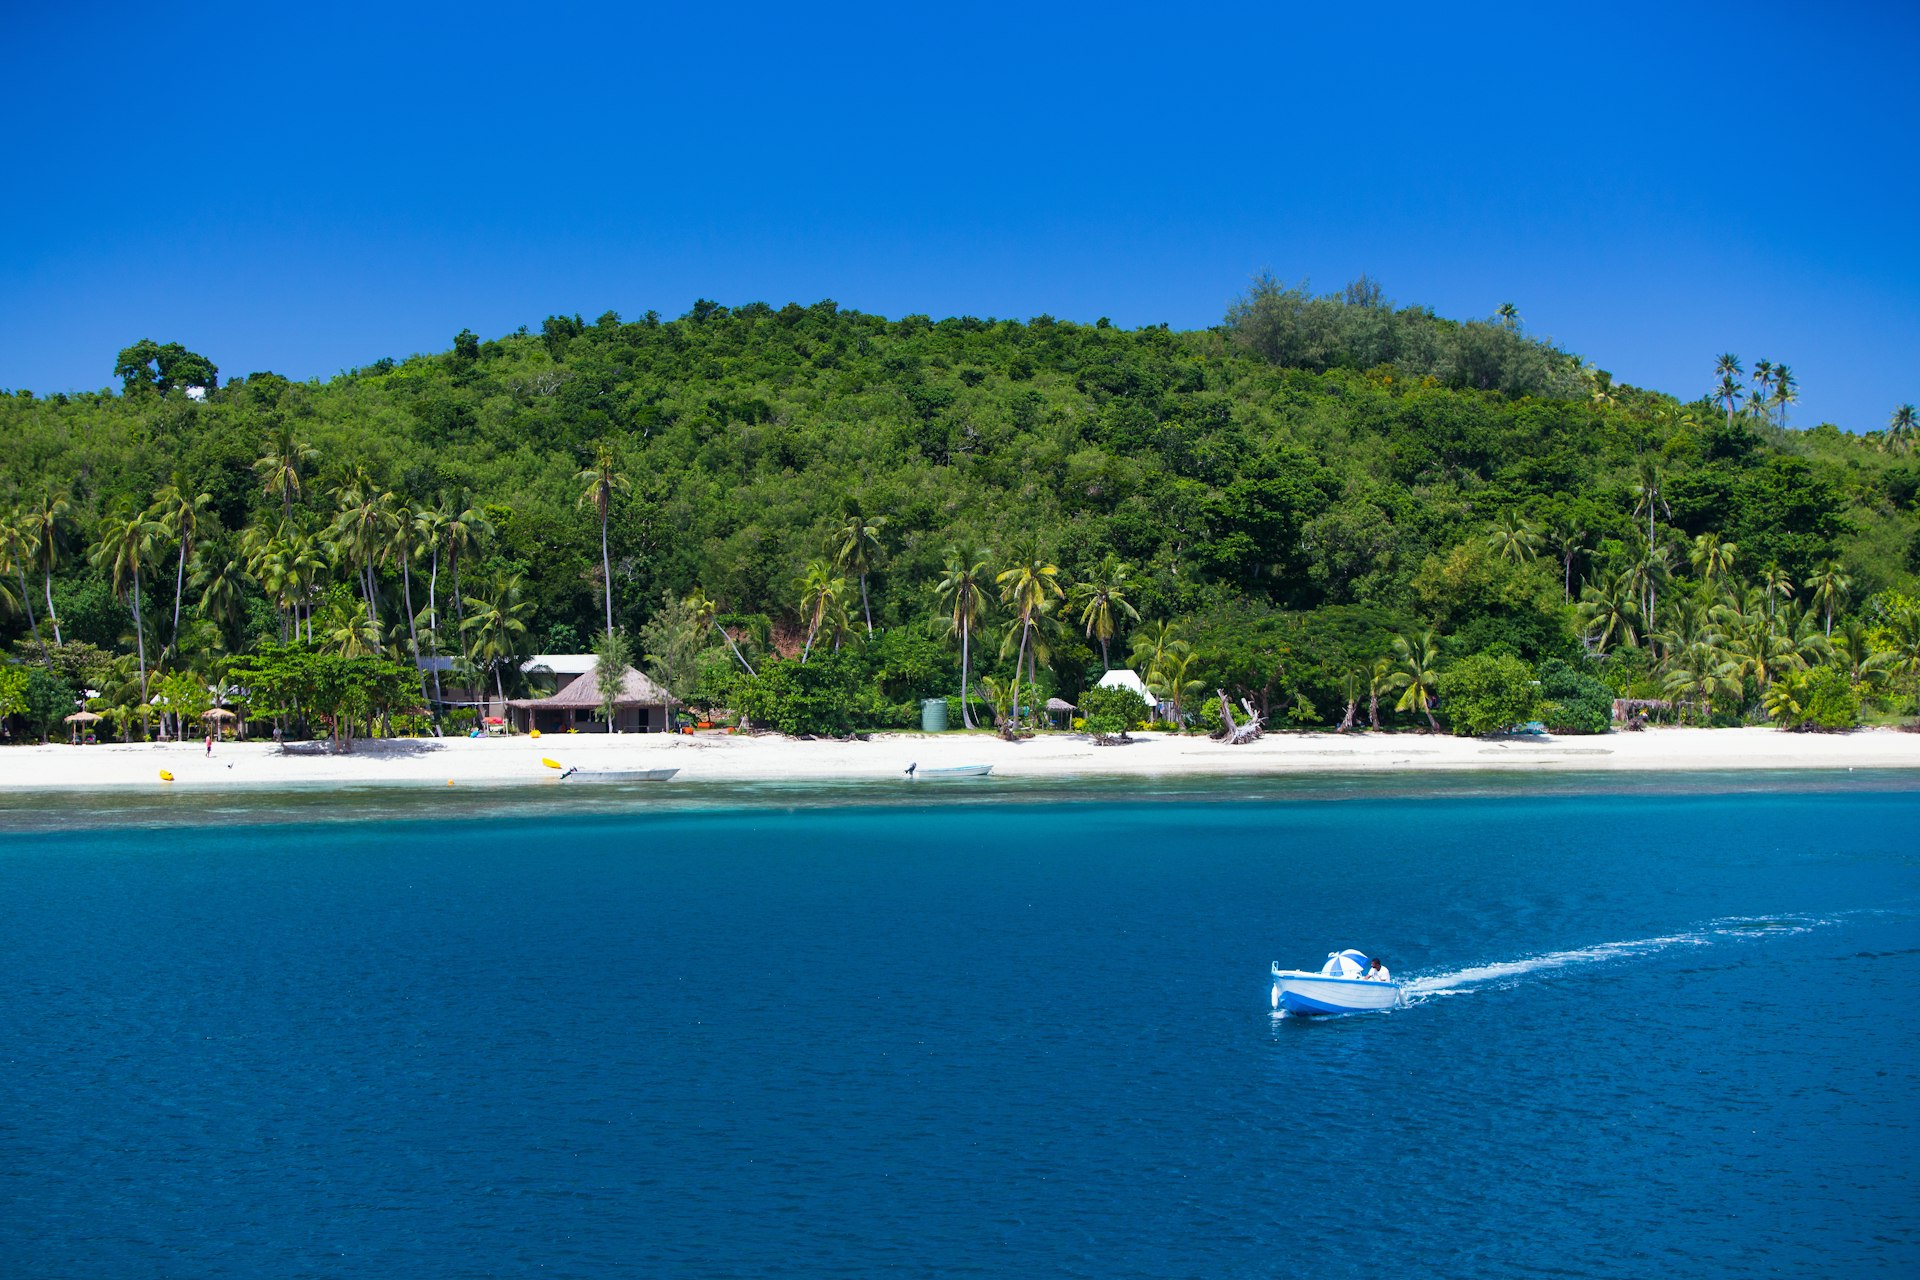 A water taxi makes its way across blue water along the shores of the Yasawa Islands.